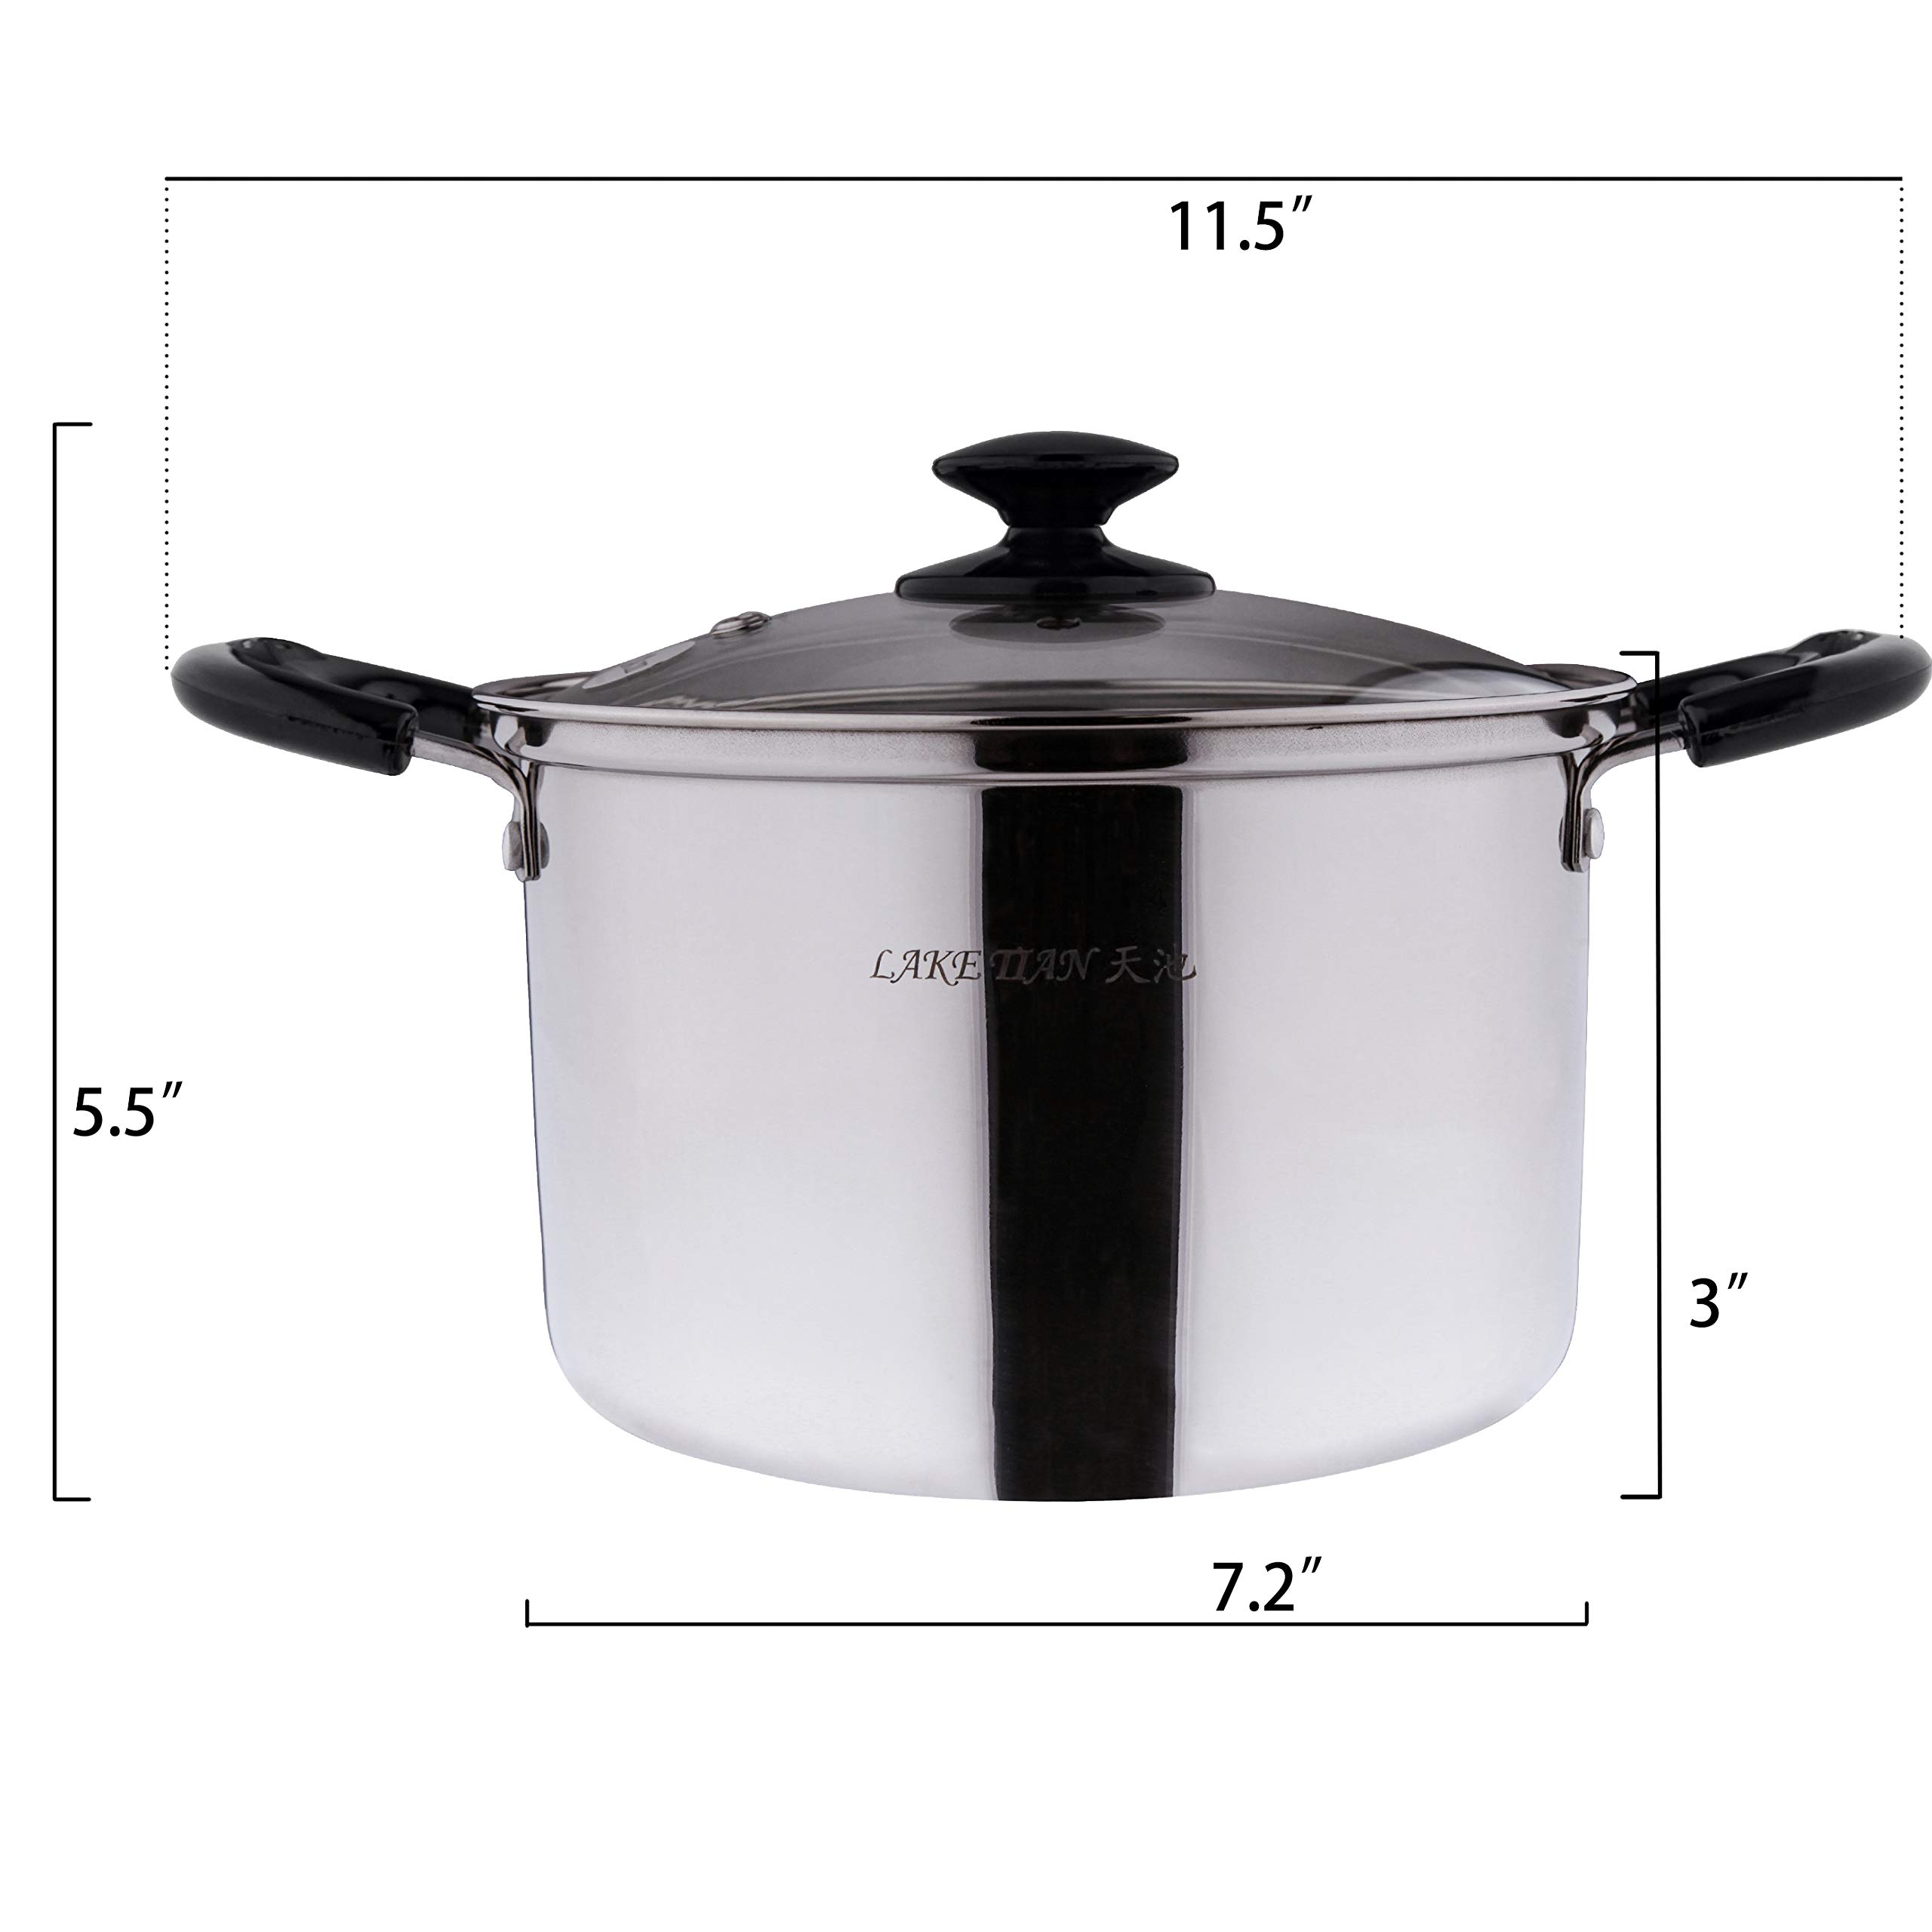 Lake Tian Stainless Steel Stock Pot, Stew Pot, Simmering Pot, Soup Pot with Lid, Healthy Duty, Dishwasher Safe, Saucepot with Lid Quart Stockpot,Silver (2.5 qt/7.25″)